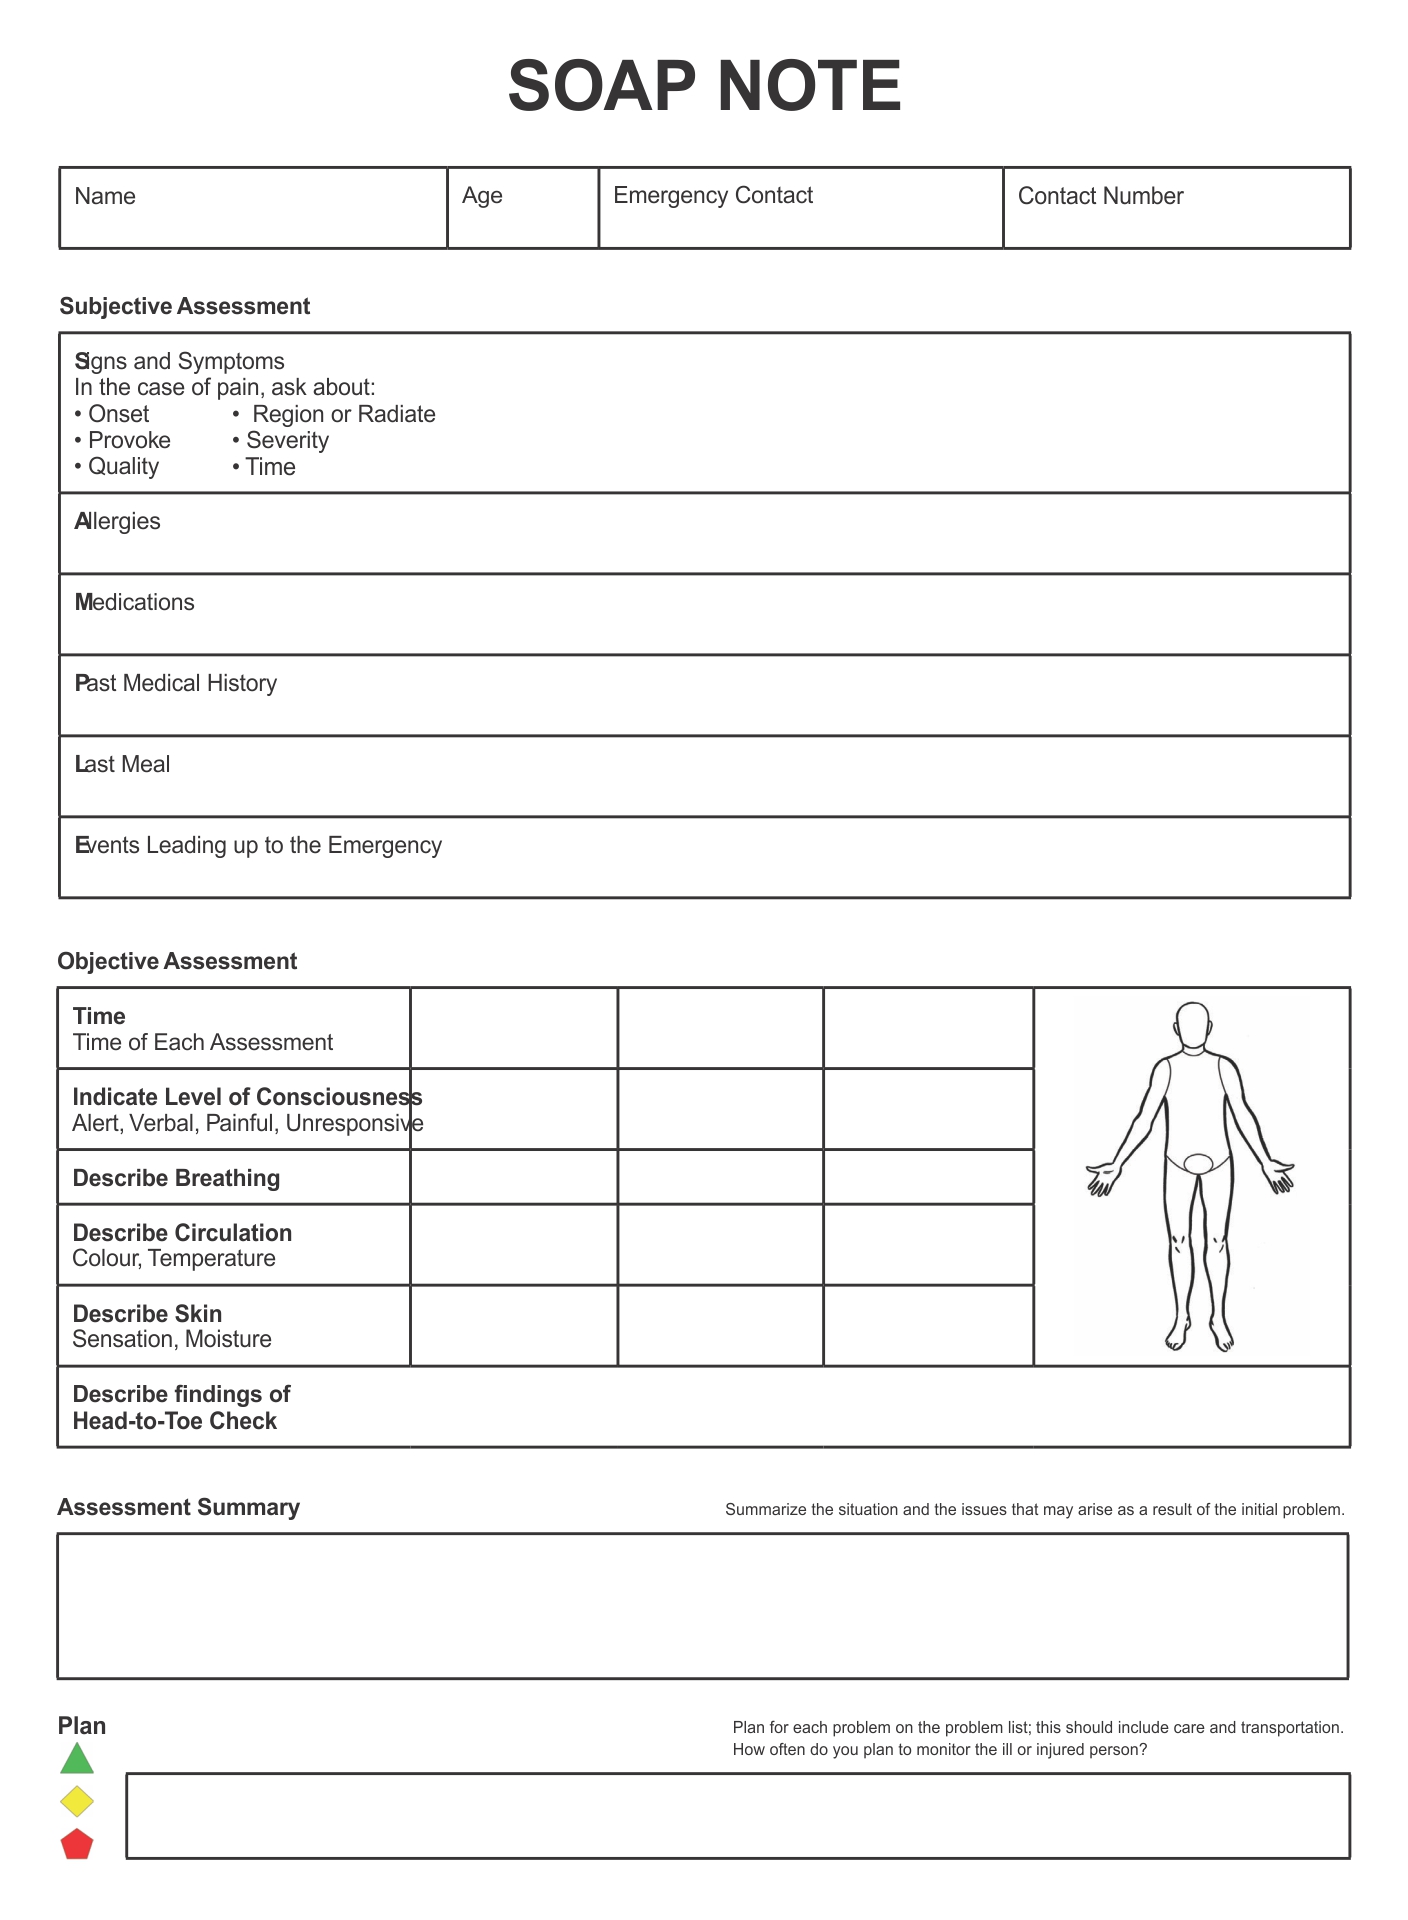 Chiropractic soap notes template free